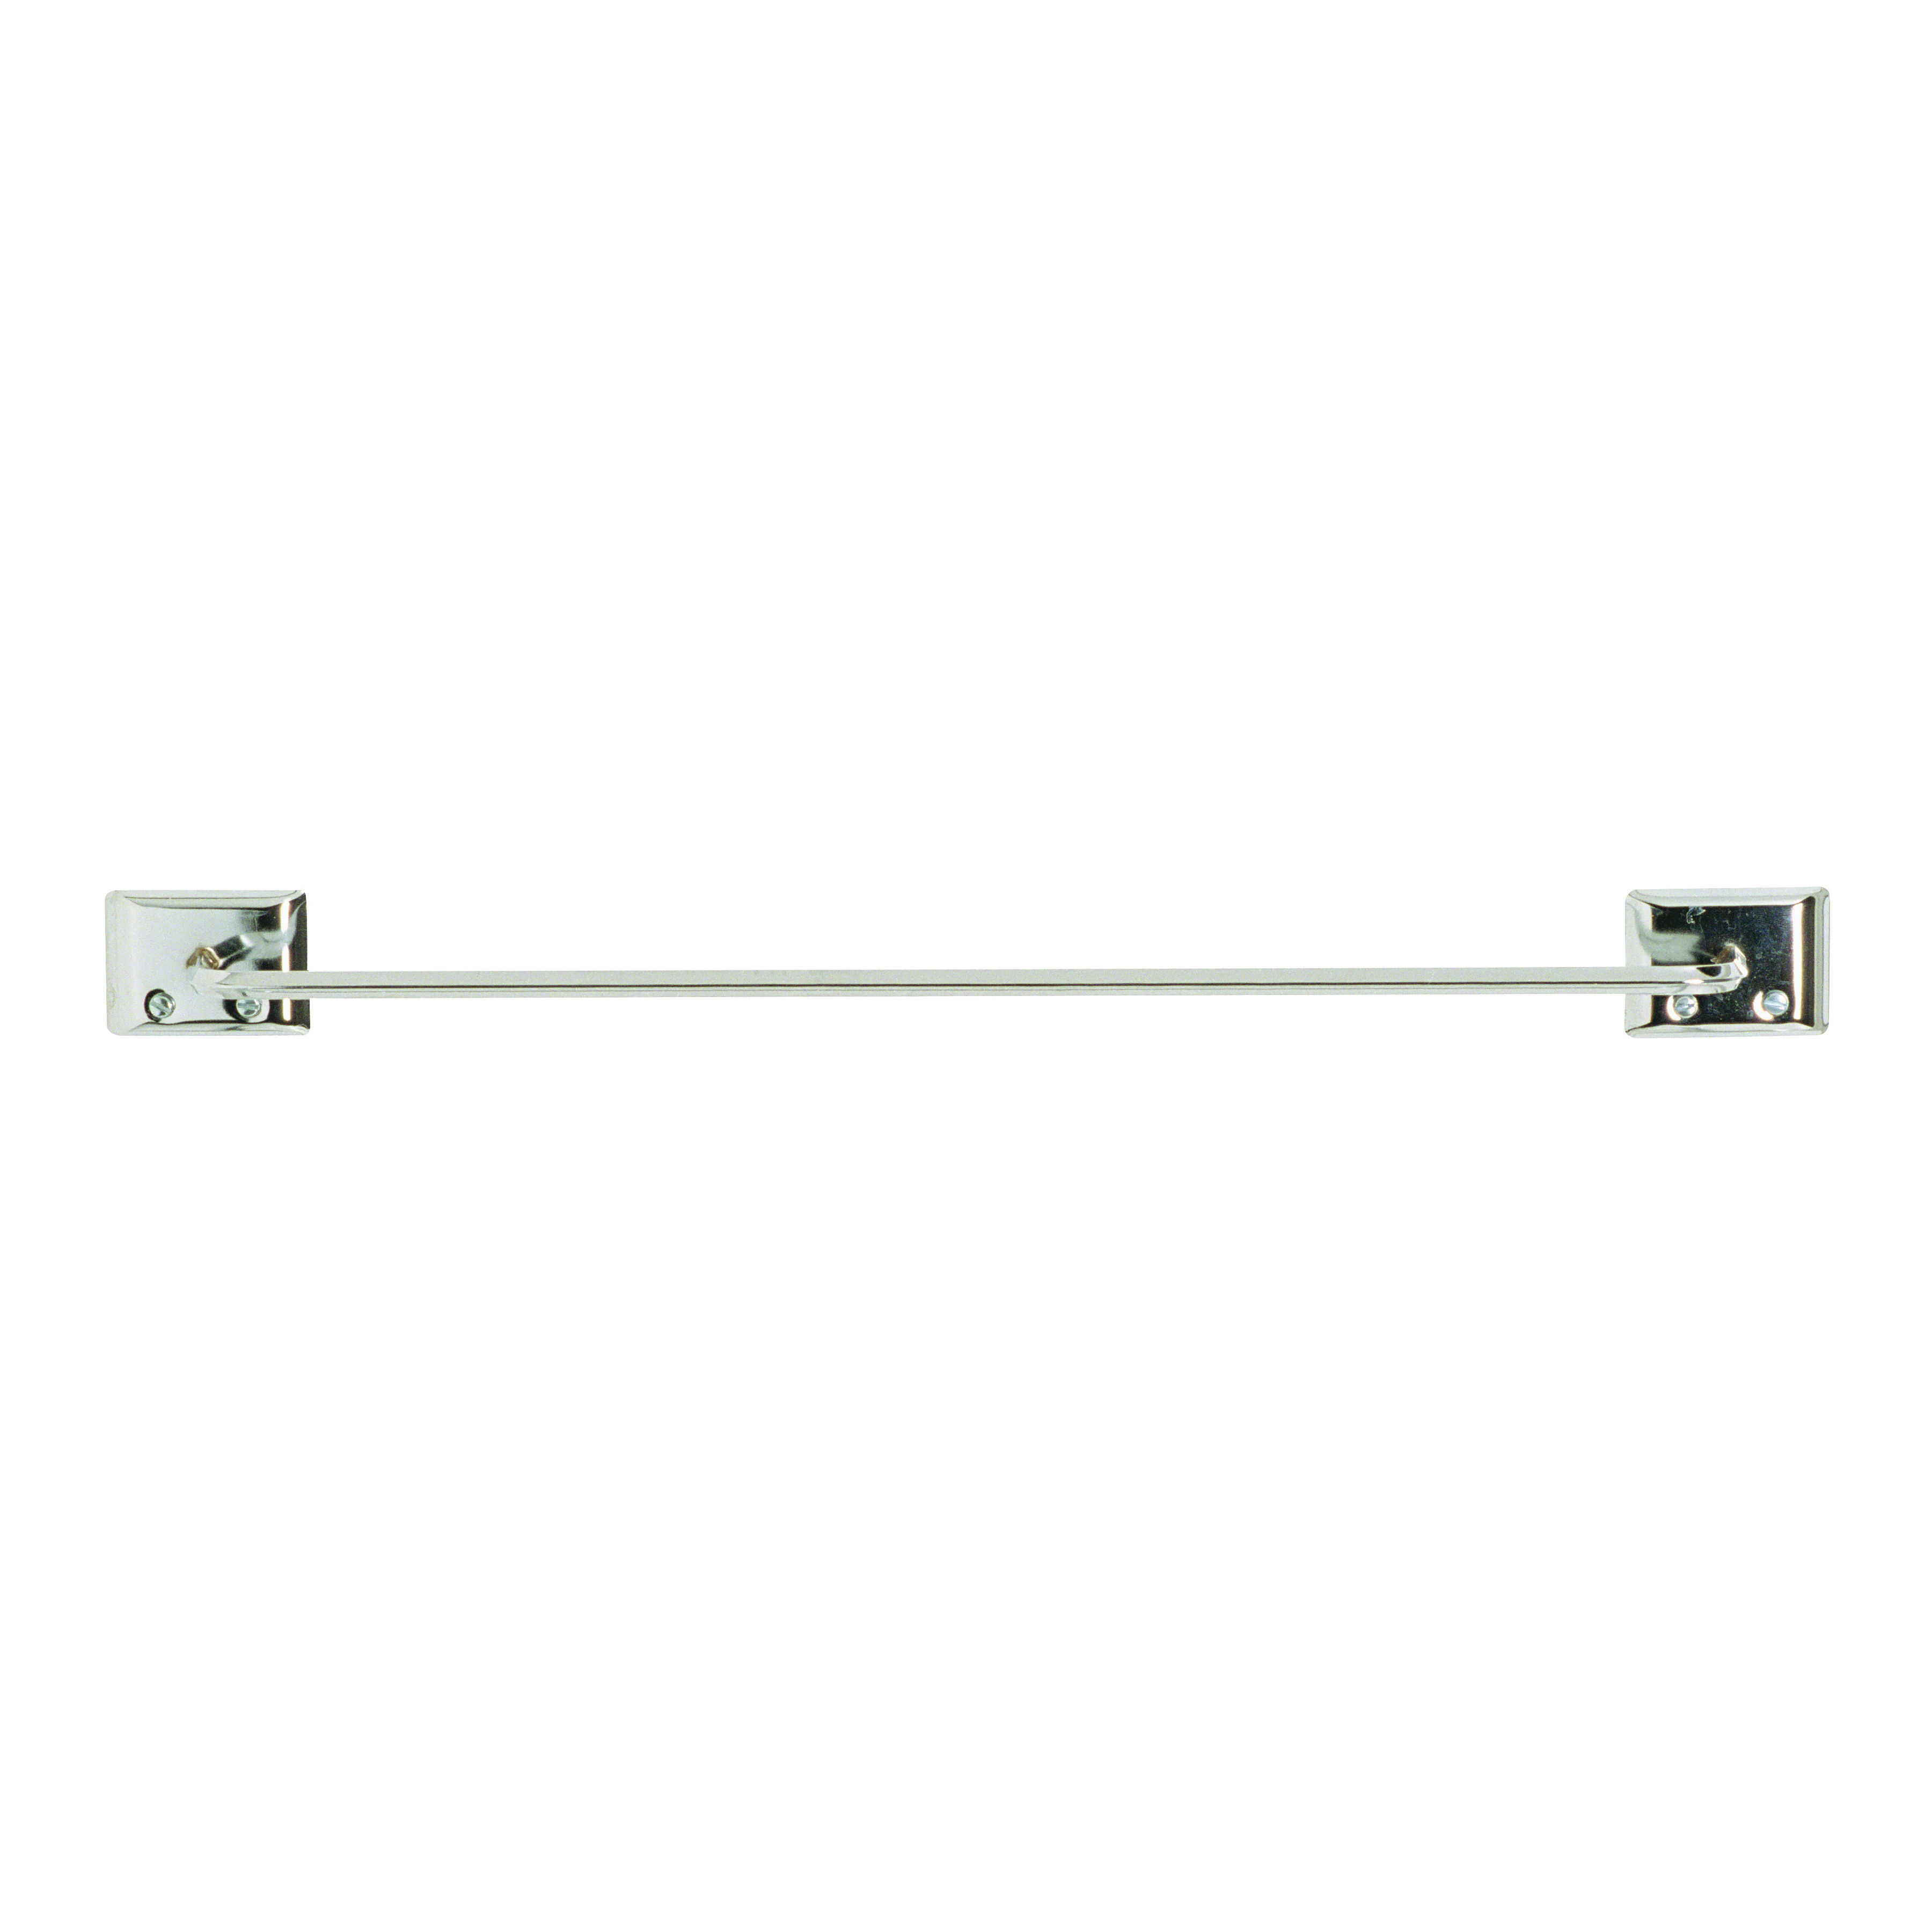 38110 Towel Bar, 18 in L Rod, Steel, Chrome, Surface Mounting